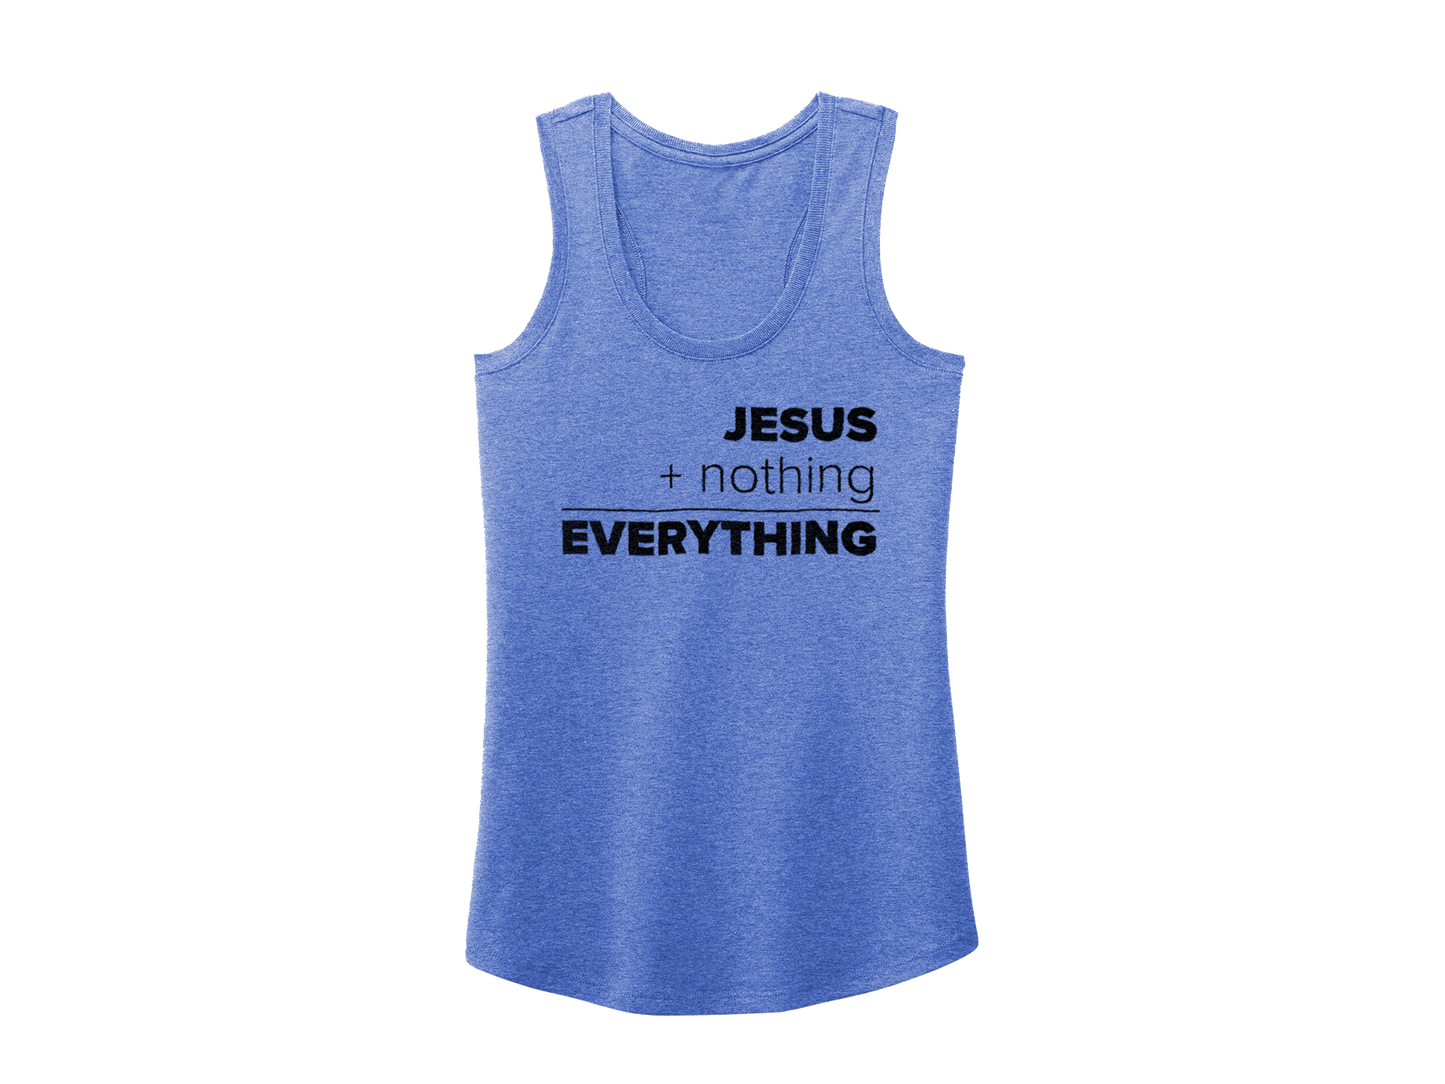 JESUS EQUALS EVERYTHING TANK BLUE - CHRISTIAN CLOTHING